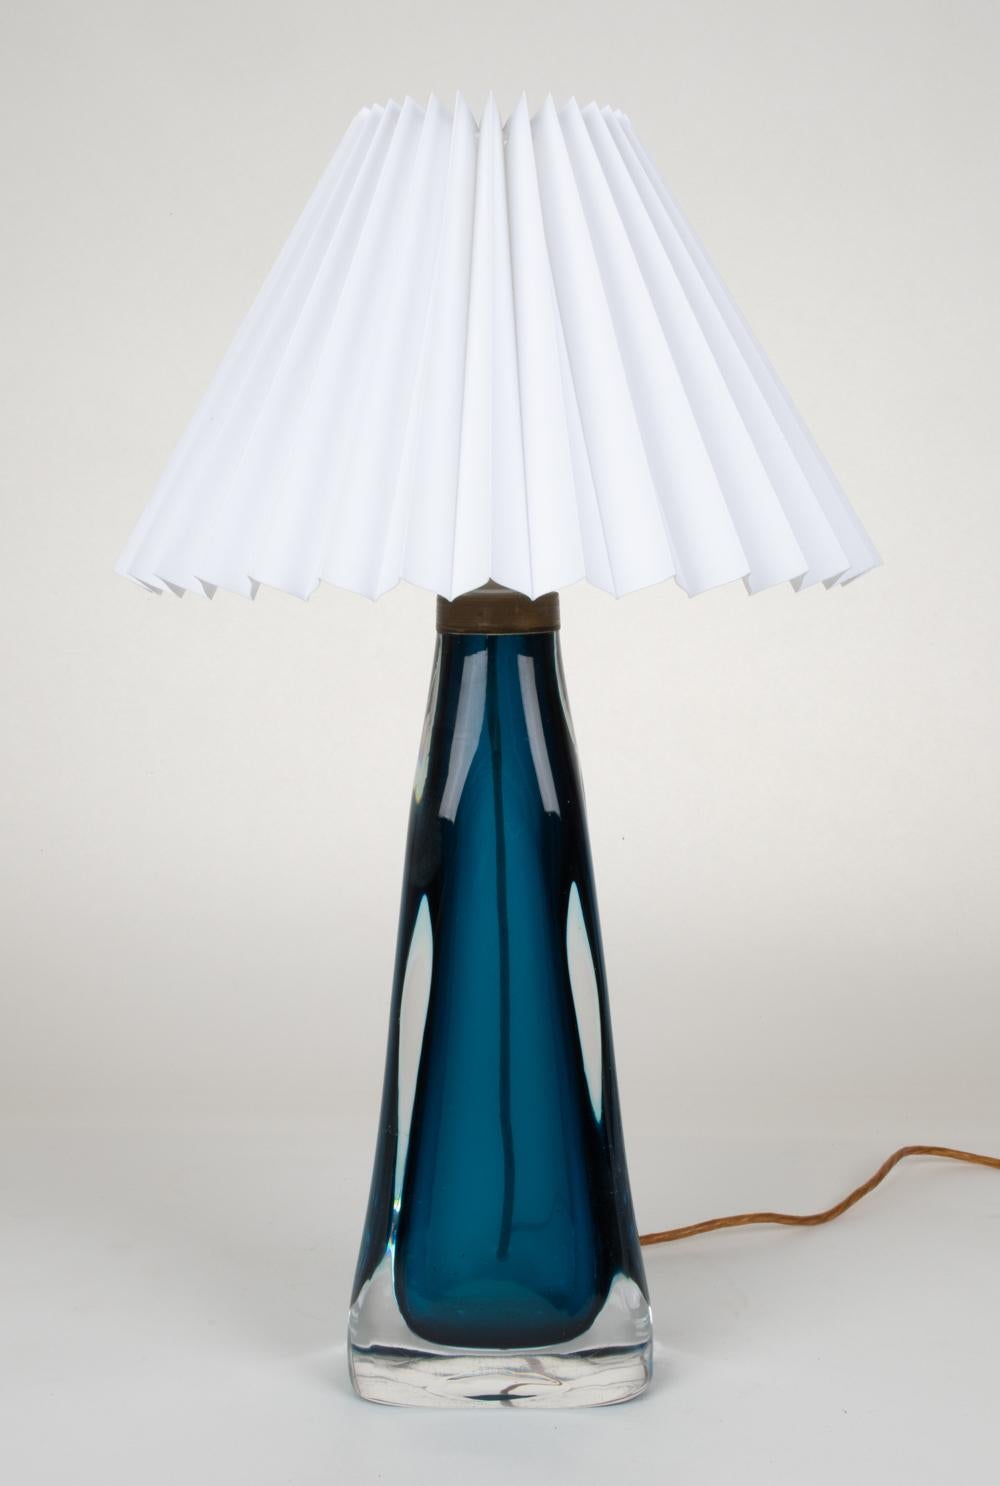 A sizable Swedish midcentury table lamp in Sommerso technique teal blue and clear cased glass, with an organic inspired form. Designed by Carl Fagerlund for Orrefors as part of his ongoing position where he served as a lighting designer from